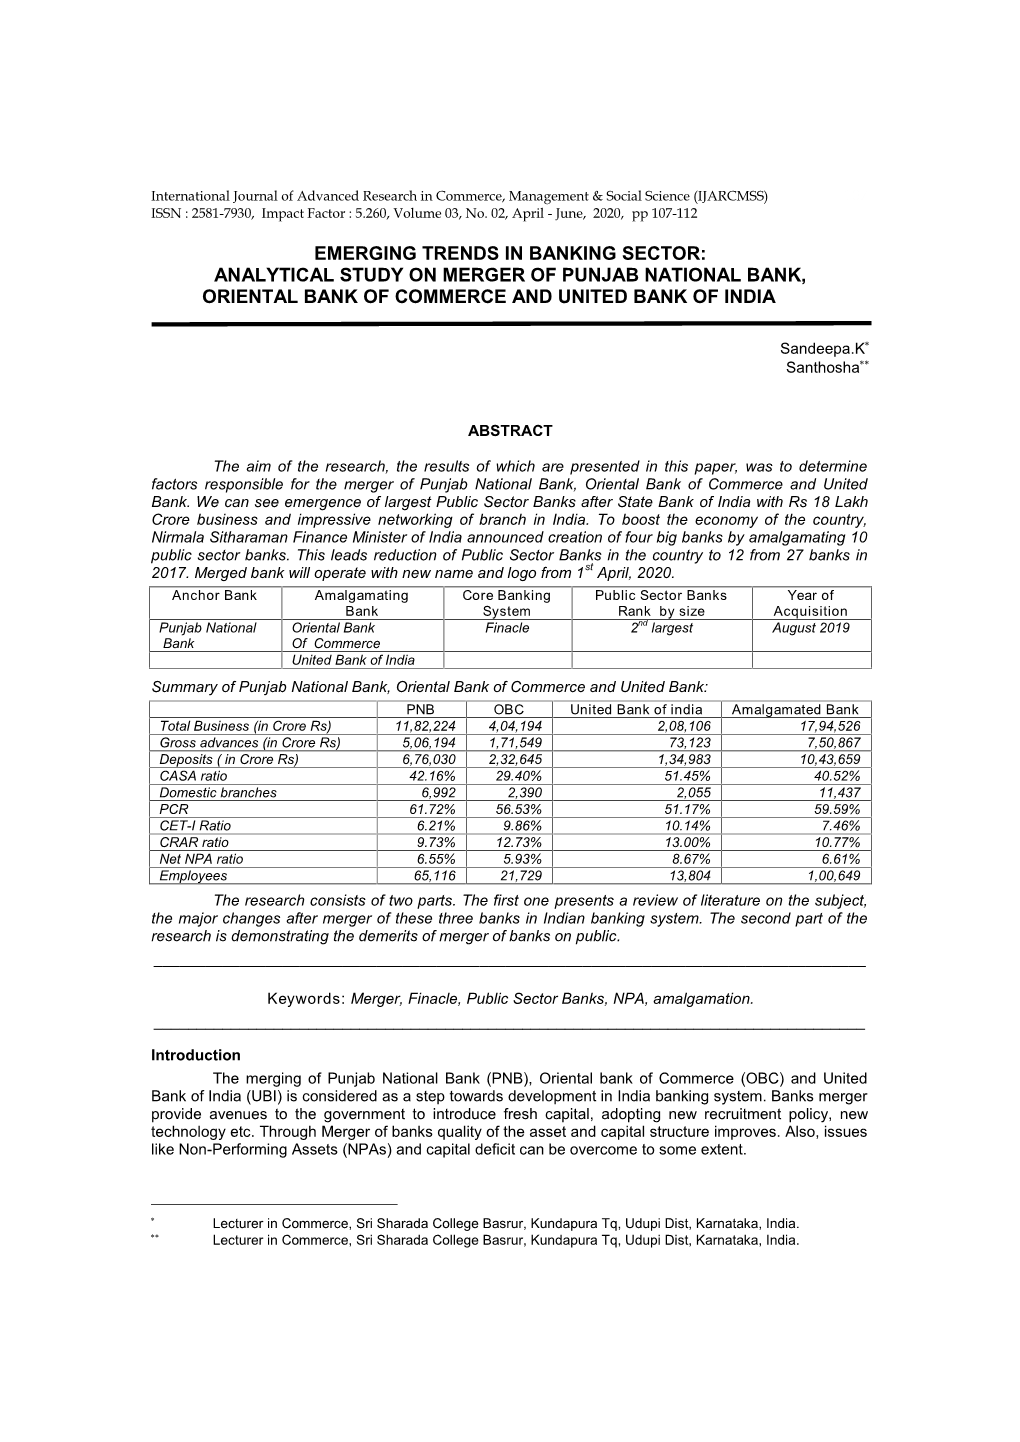 Analytical Study on Merger of Punjab National Bank, Oriental Bank of Commerce and United Bank of India